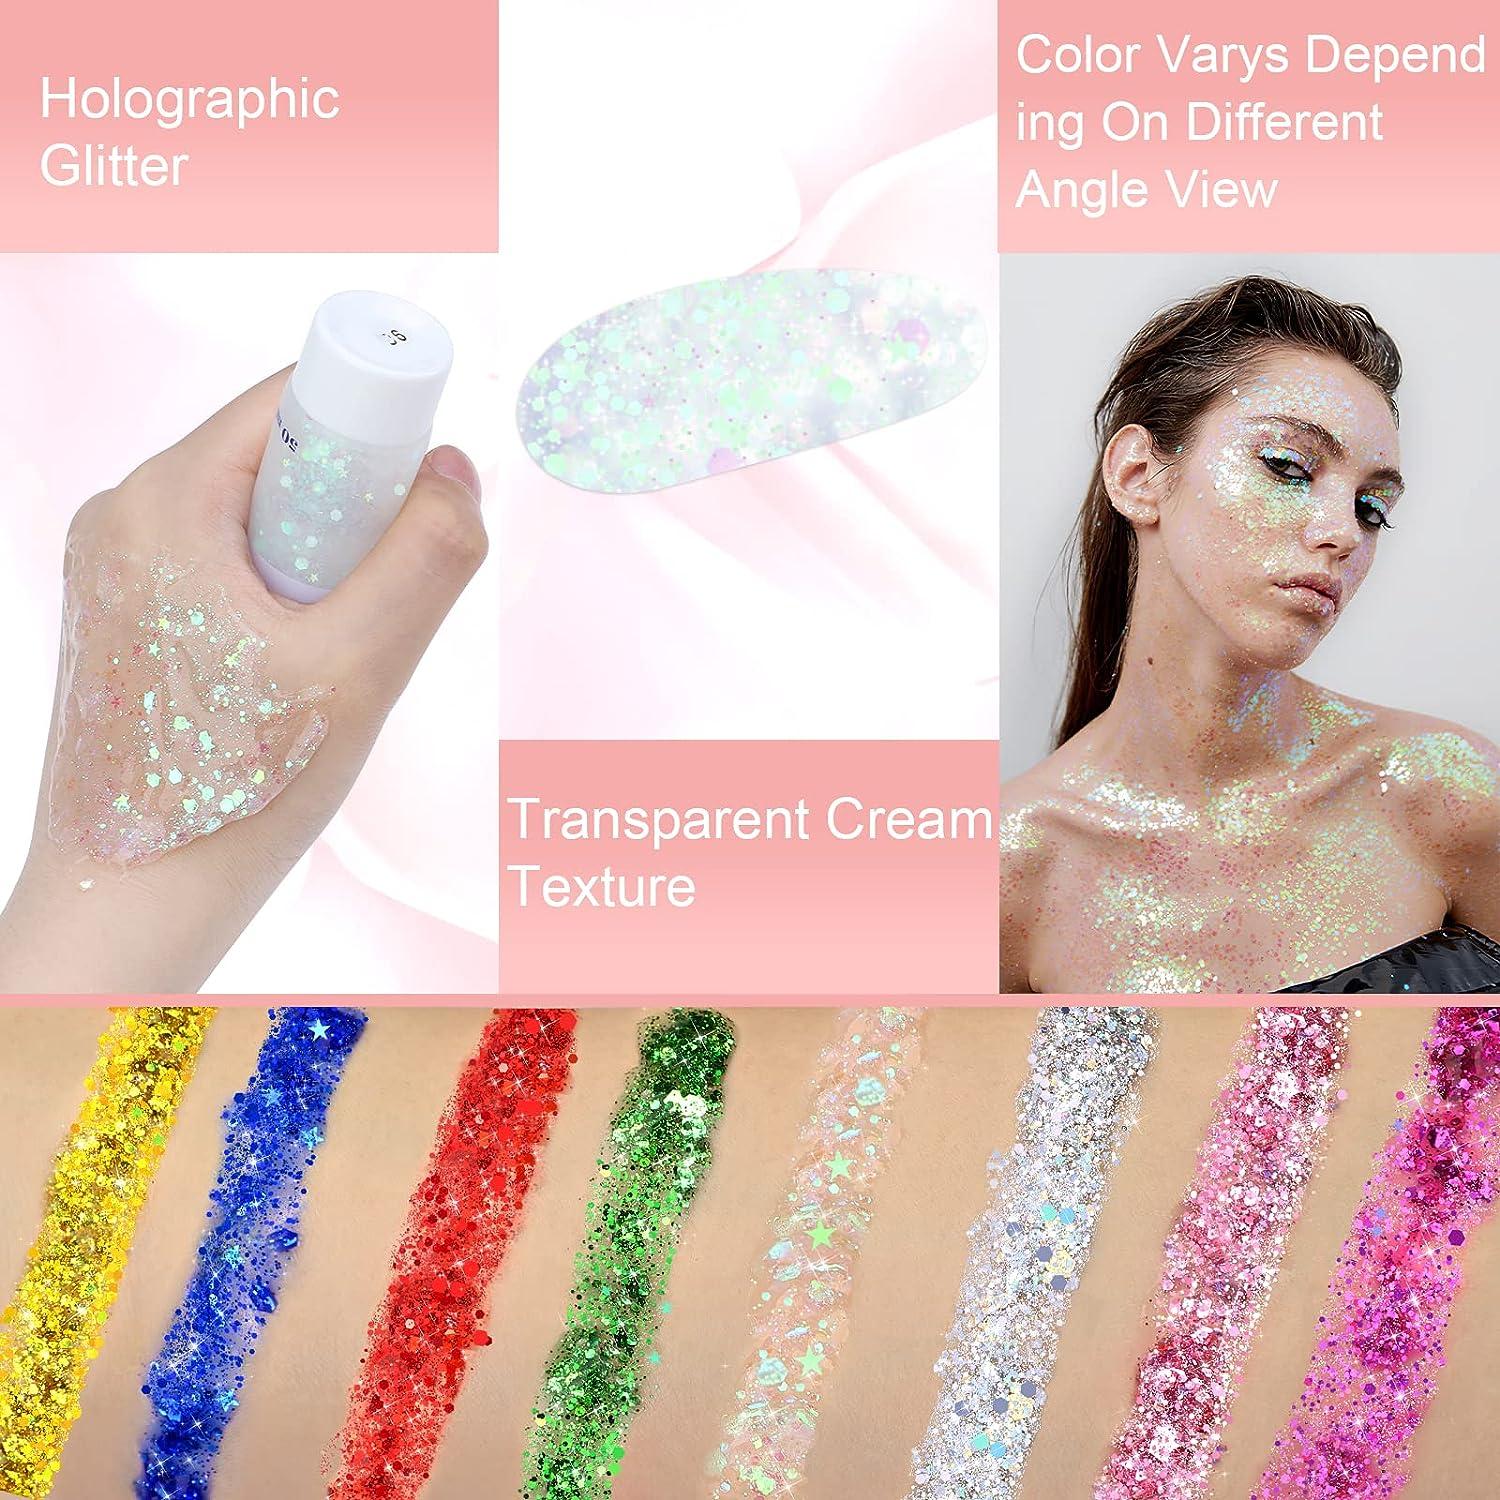 Go Ho Peach Pink Body Glitter,Singer Concerts Face Glitter Makeup,Holographic  Chunky Sequins Glitters for Eye Lip Hair Nails,Festival Rave Accessories  for Face Gems,04 Peach Pink Glitter - Yahoo Shopping